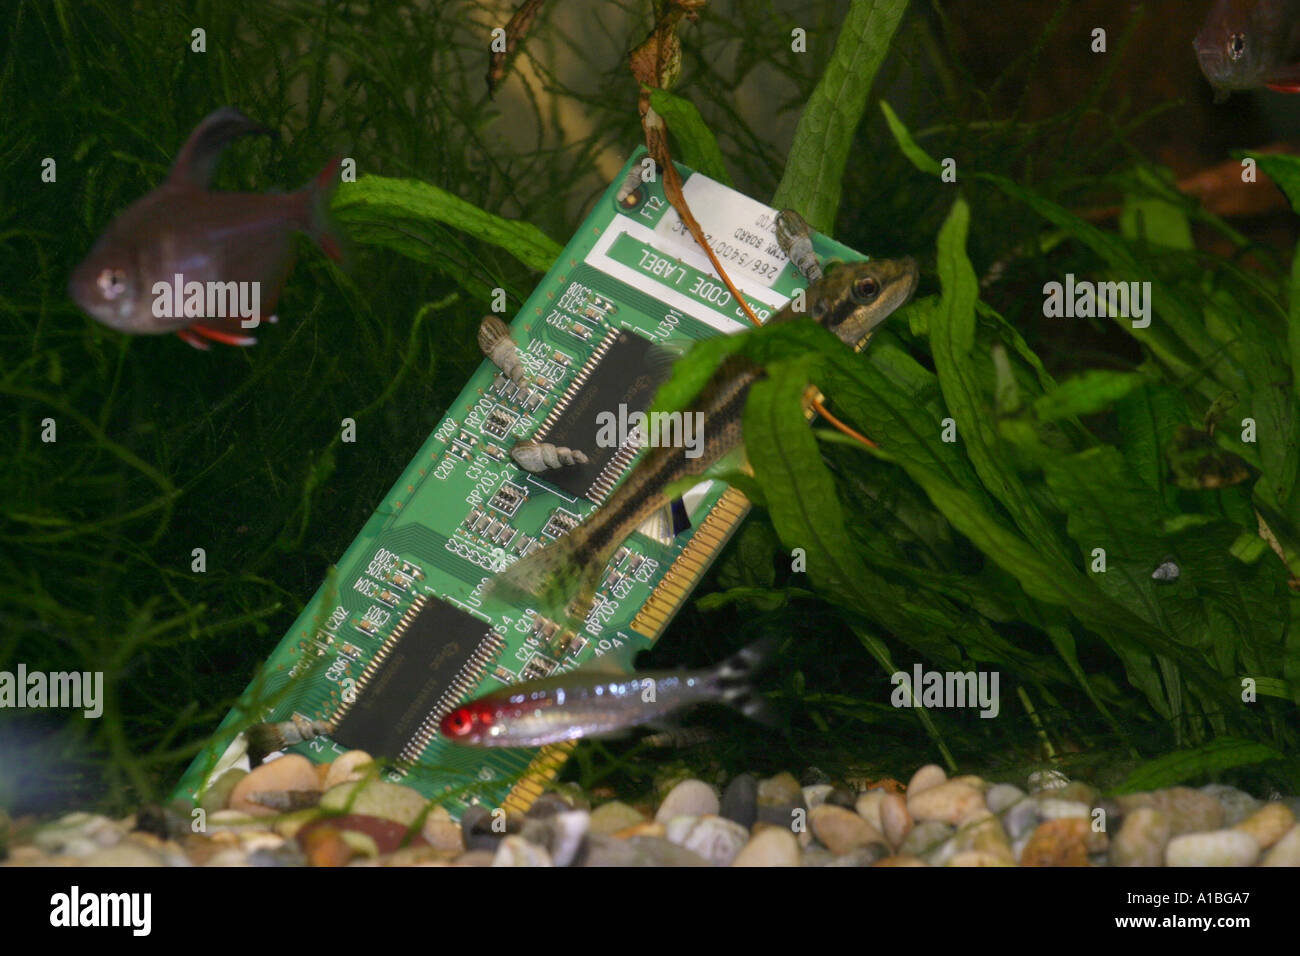 Printed circuit board submerged in tropical fish aquarium surrounded by fish Stock Photo